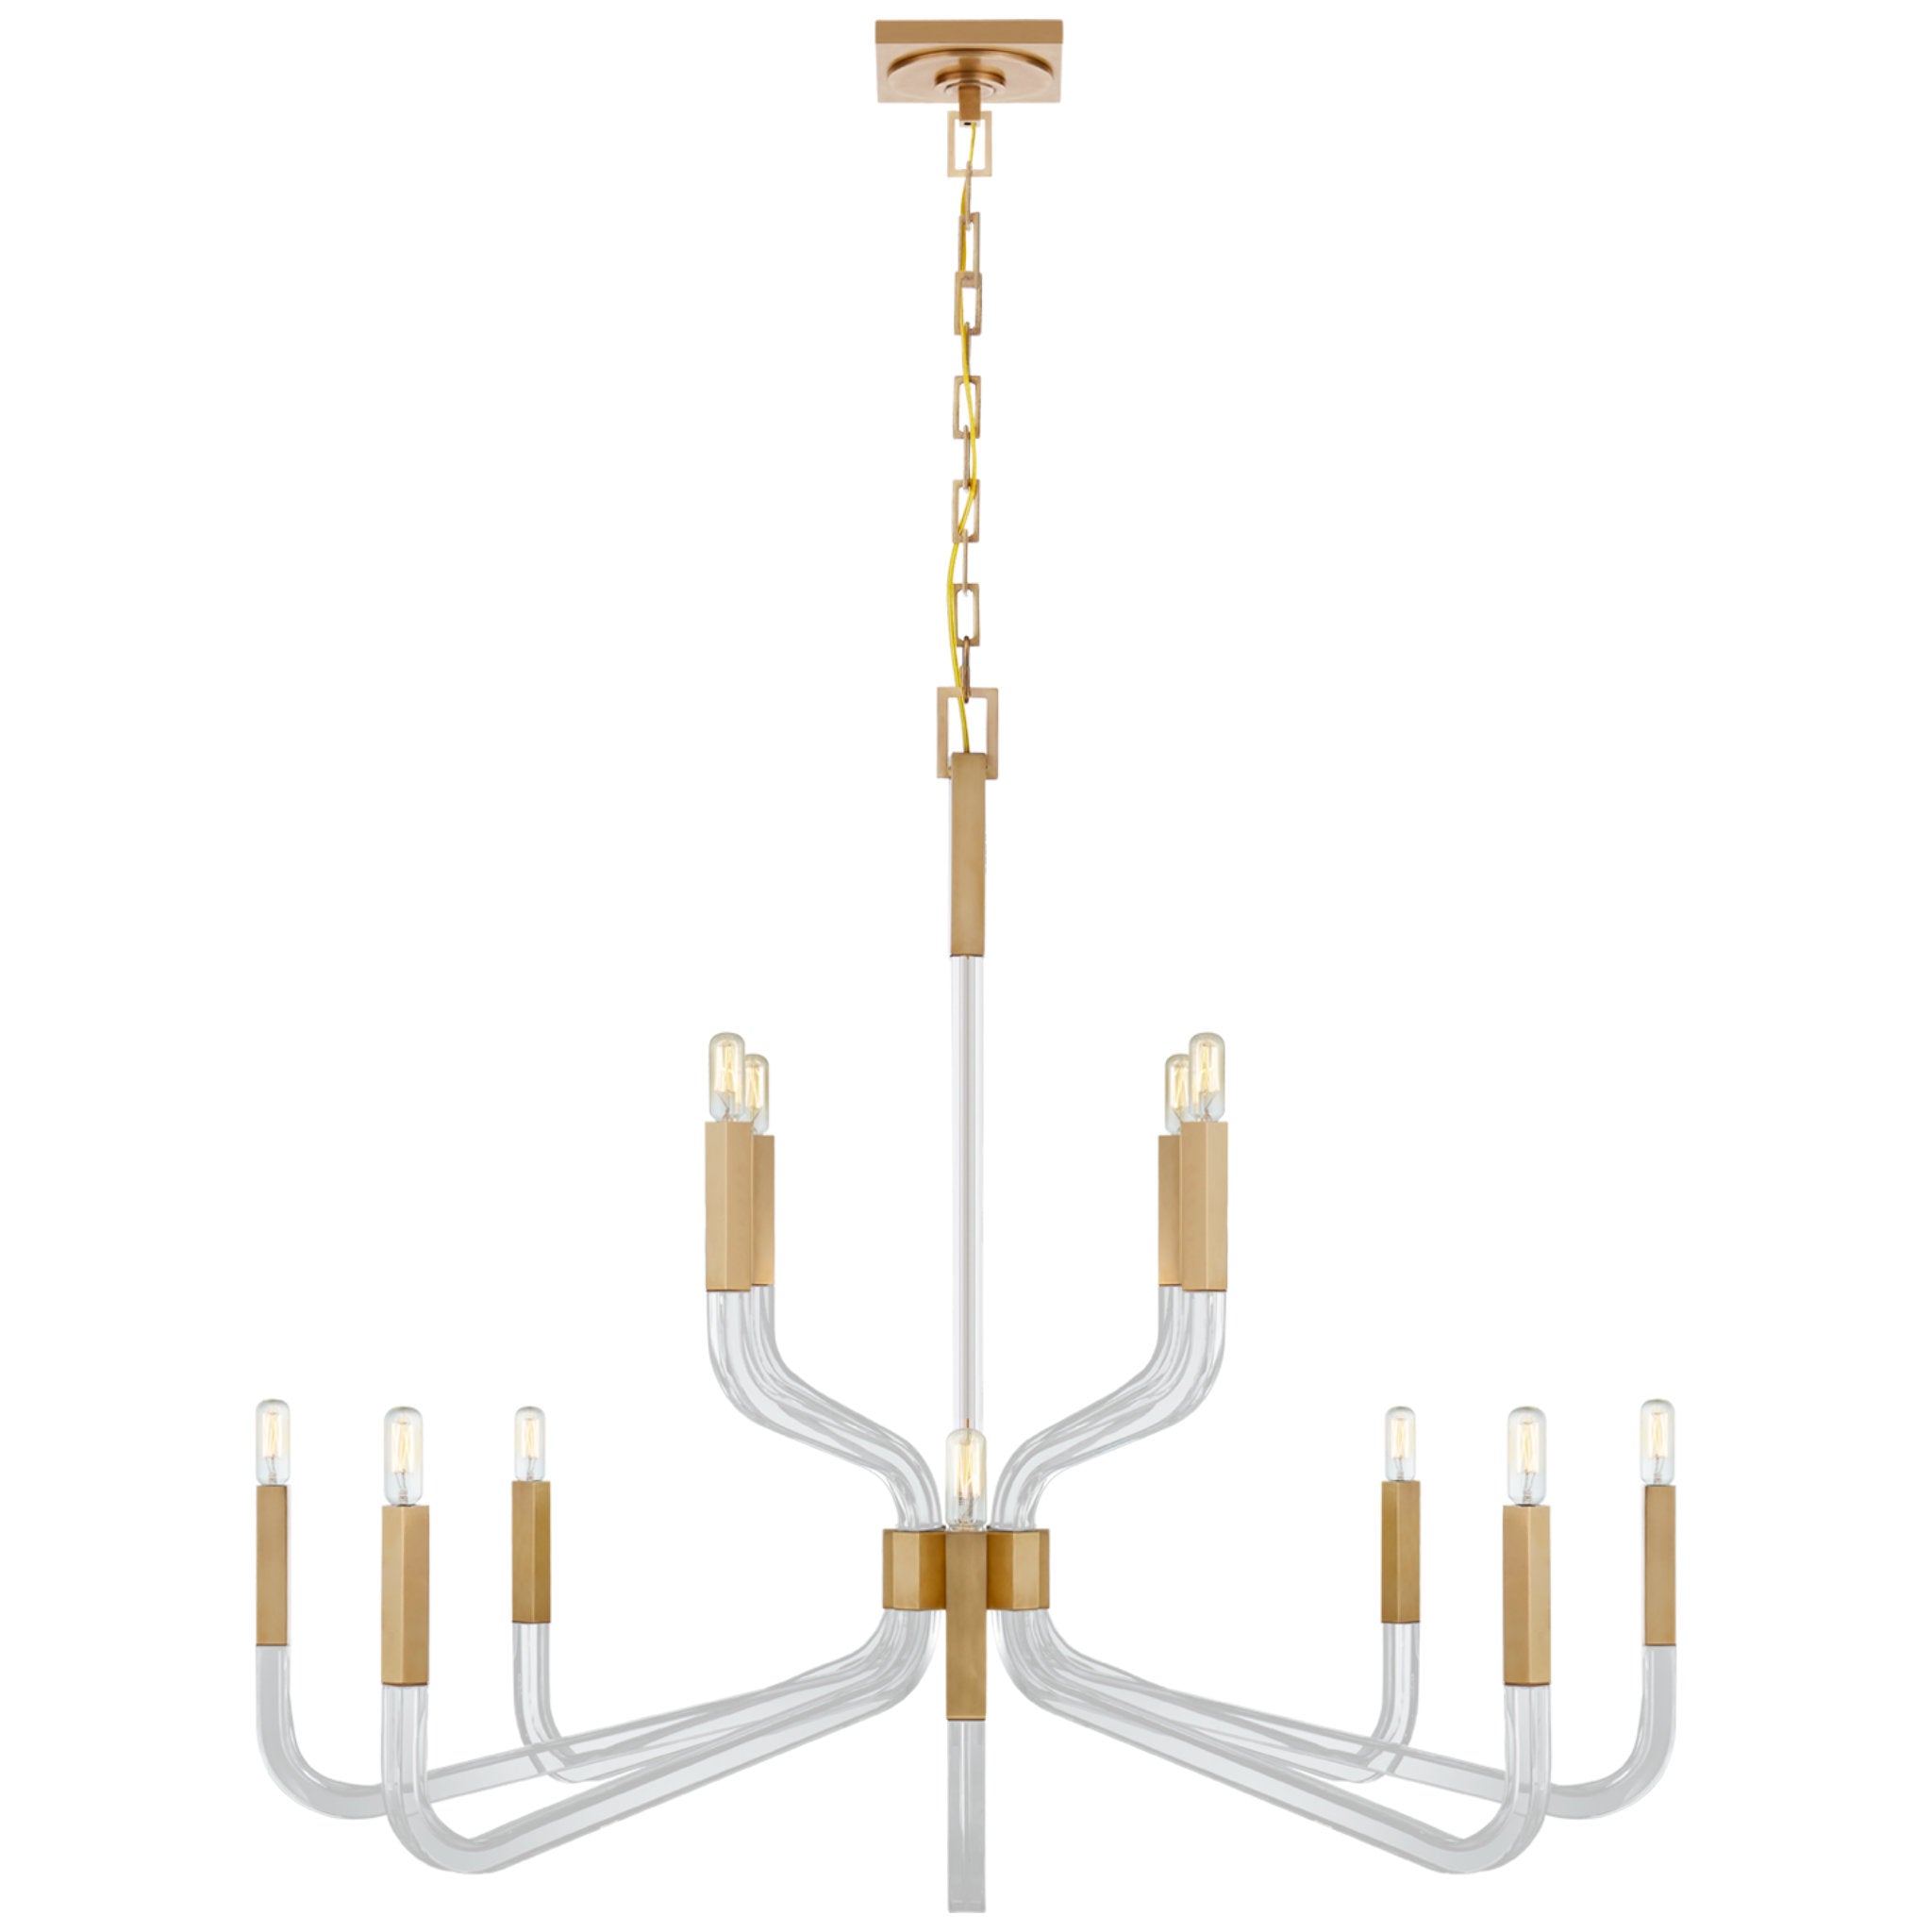 Chapman & Myers Reagan Grande Two Tier Chandelier in Antique-Burnished Brass and Crystal